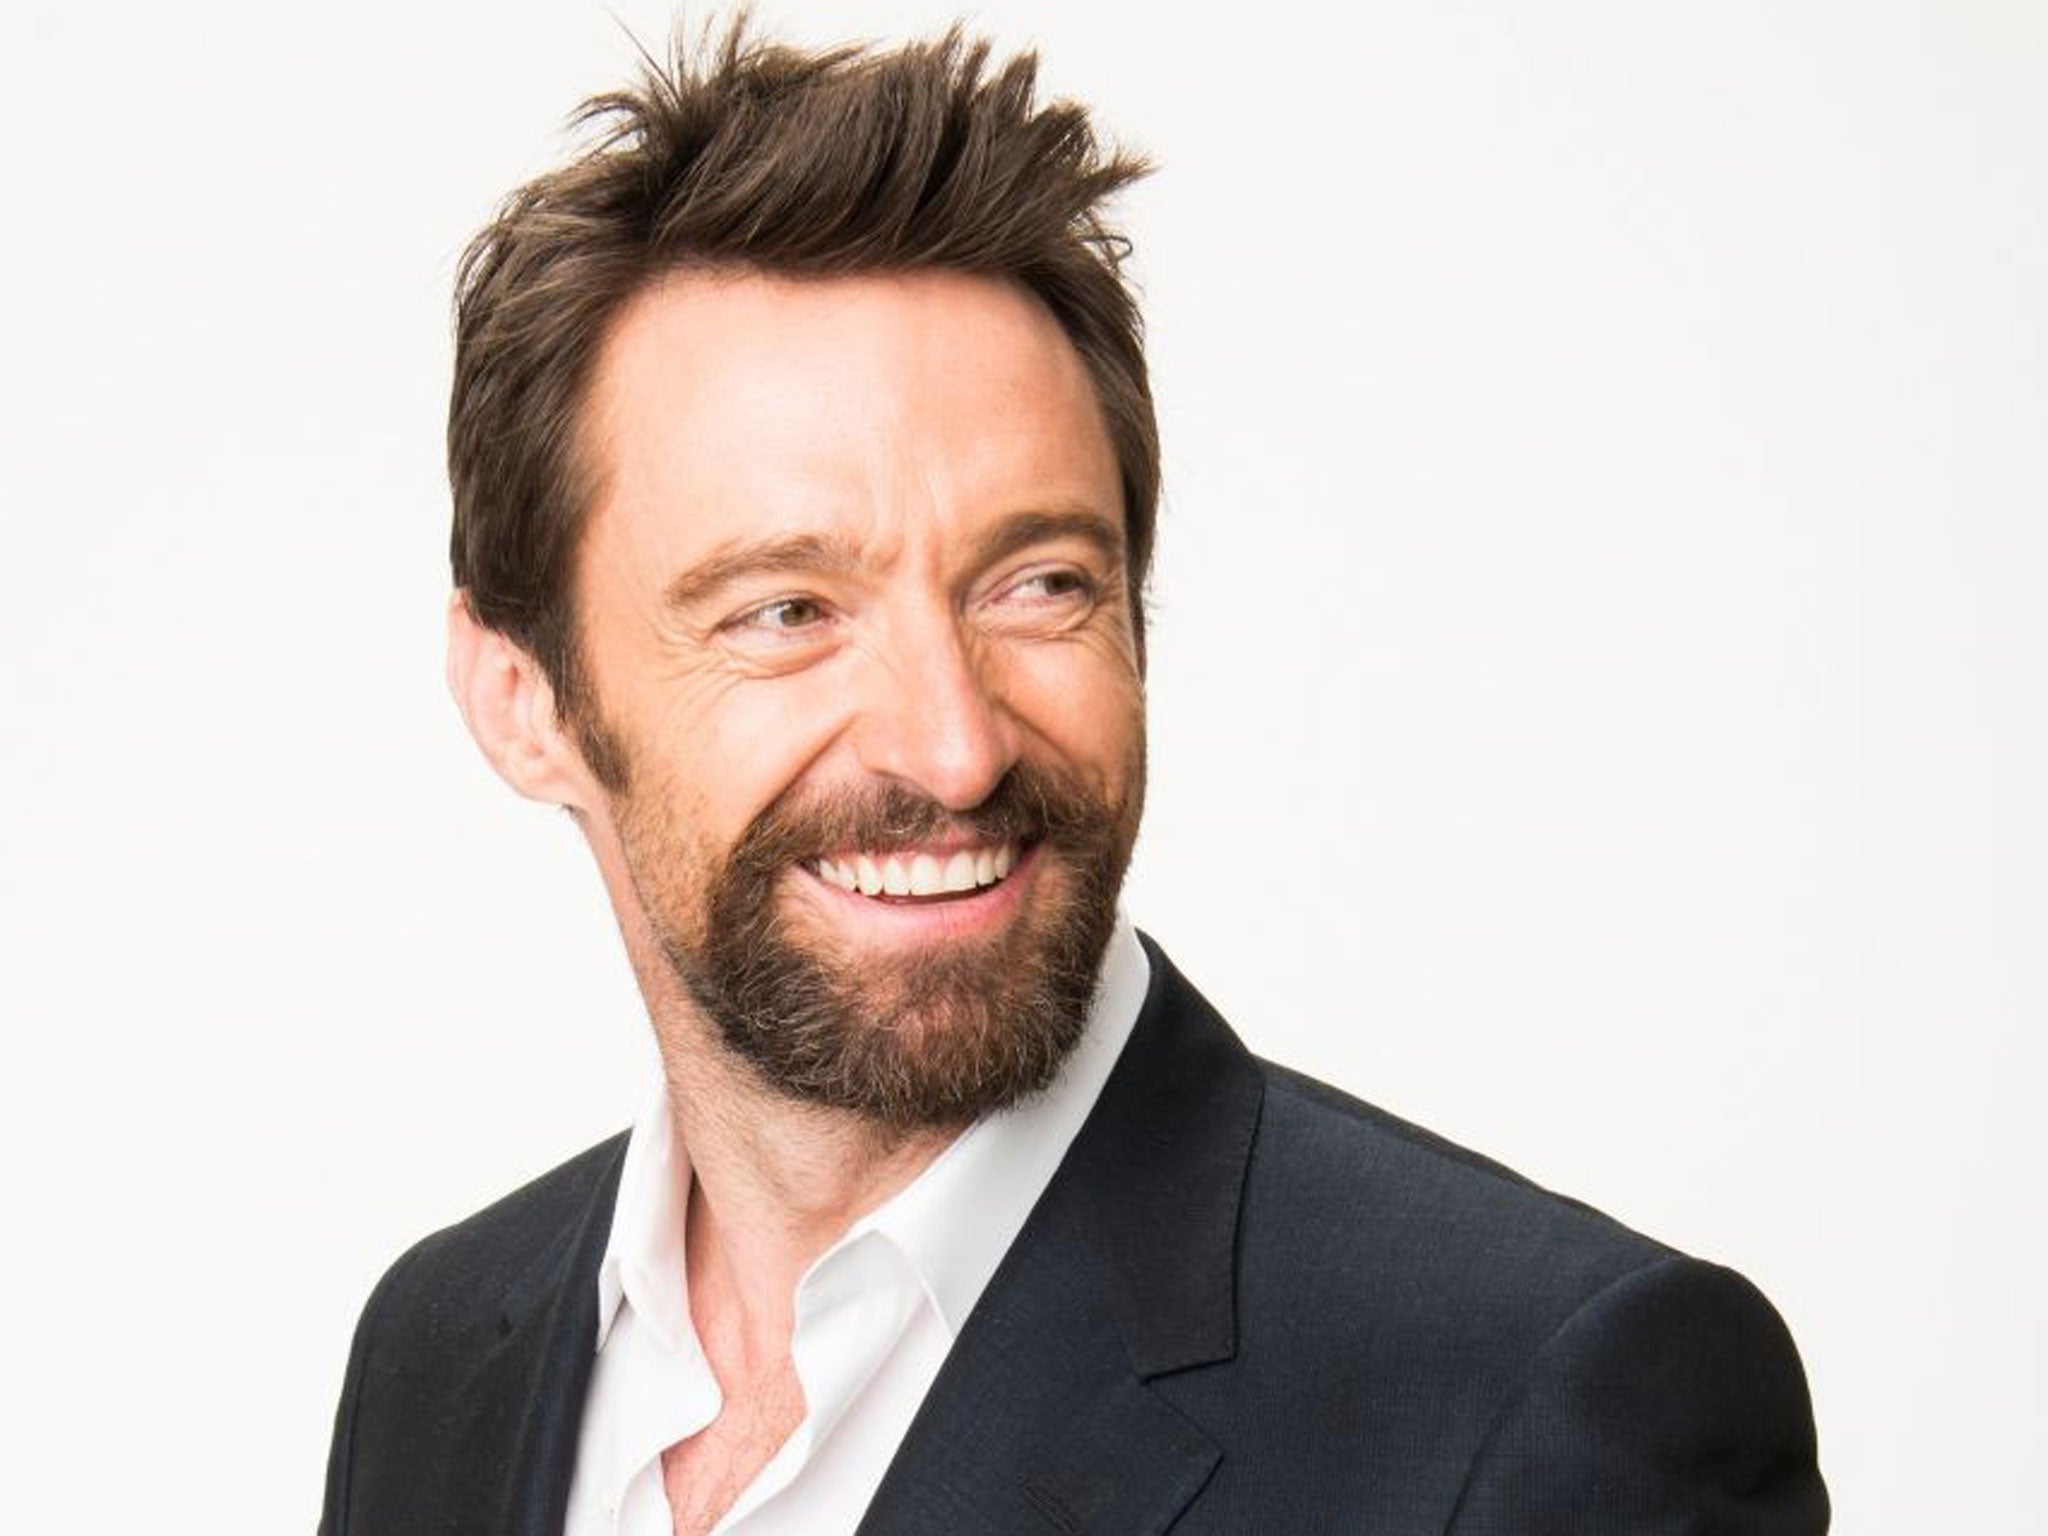 Hugh Jackman: Wolverine has not eclipsed my career- I could still play any  character | The Independent | The Independent